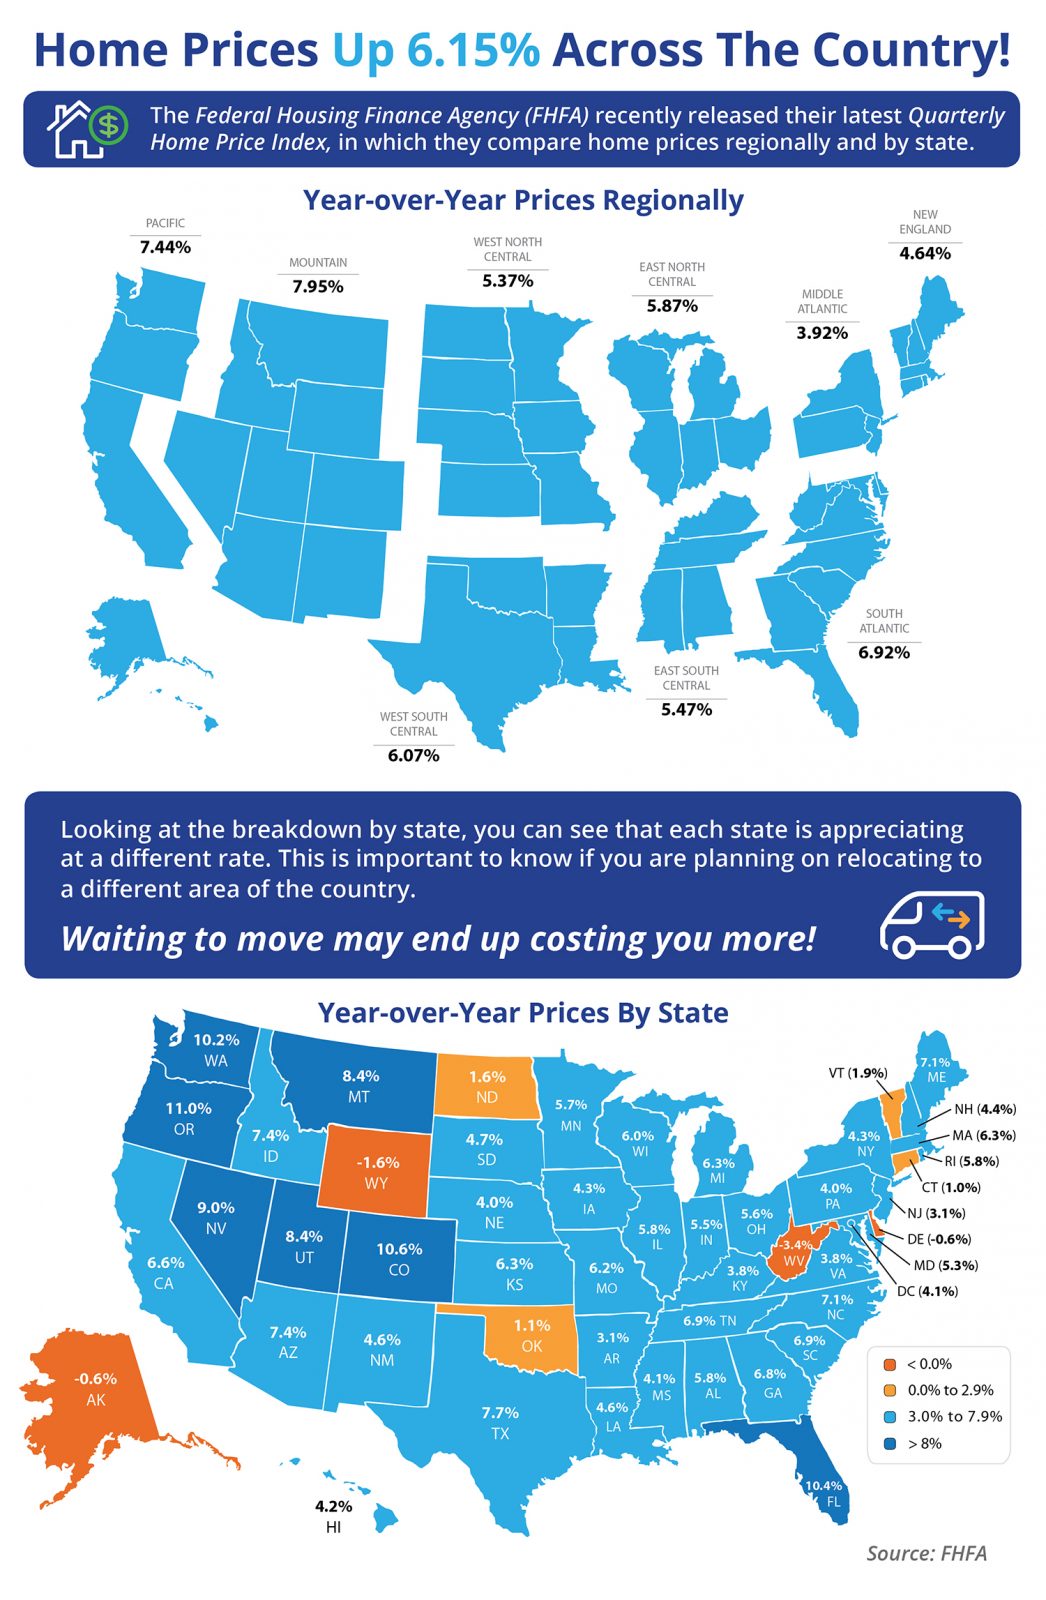 Home Prices Up 6.15% Across the Country! [INFOGRAPHIC] | MyKCM